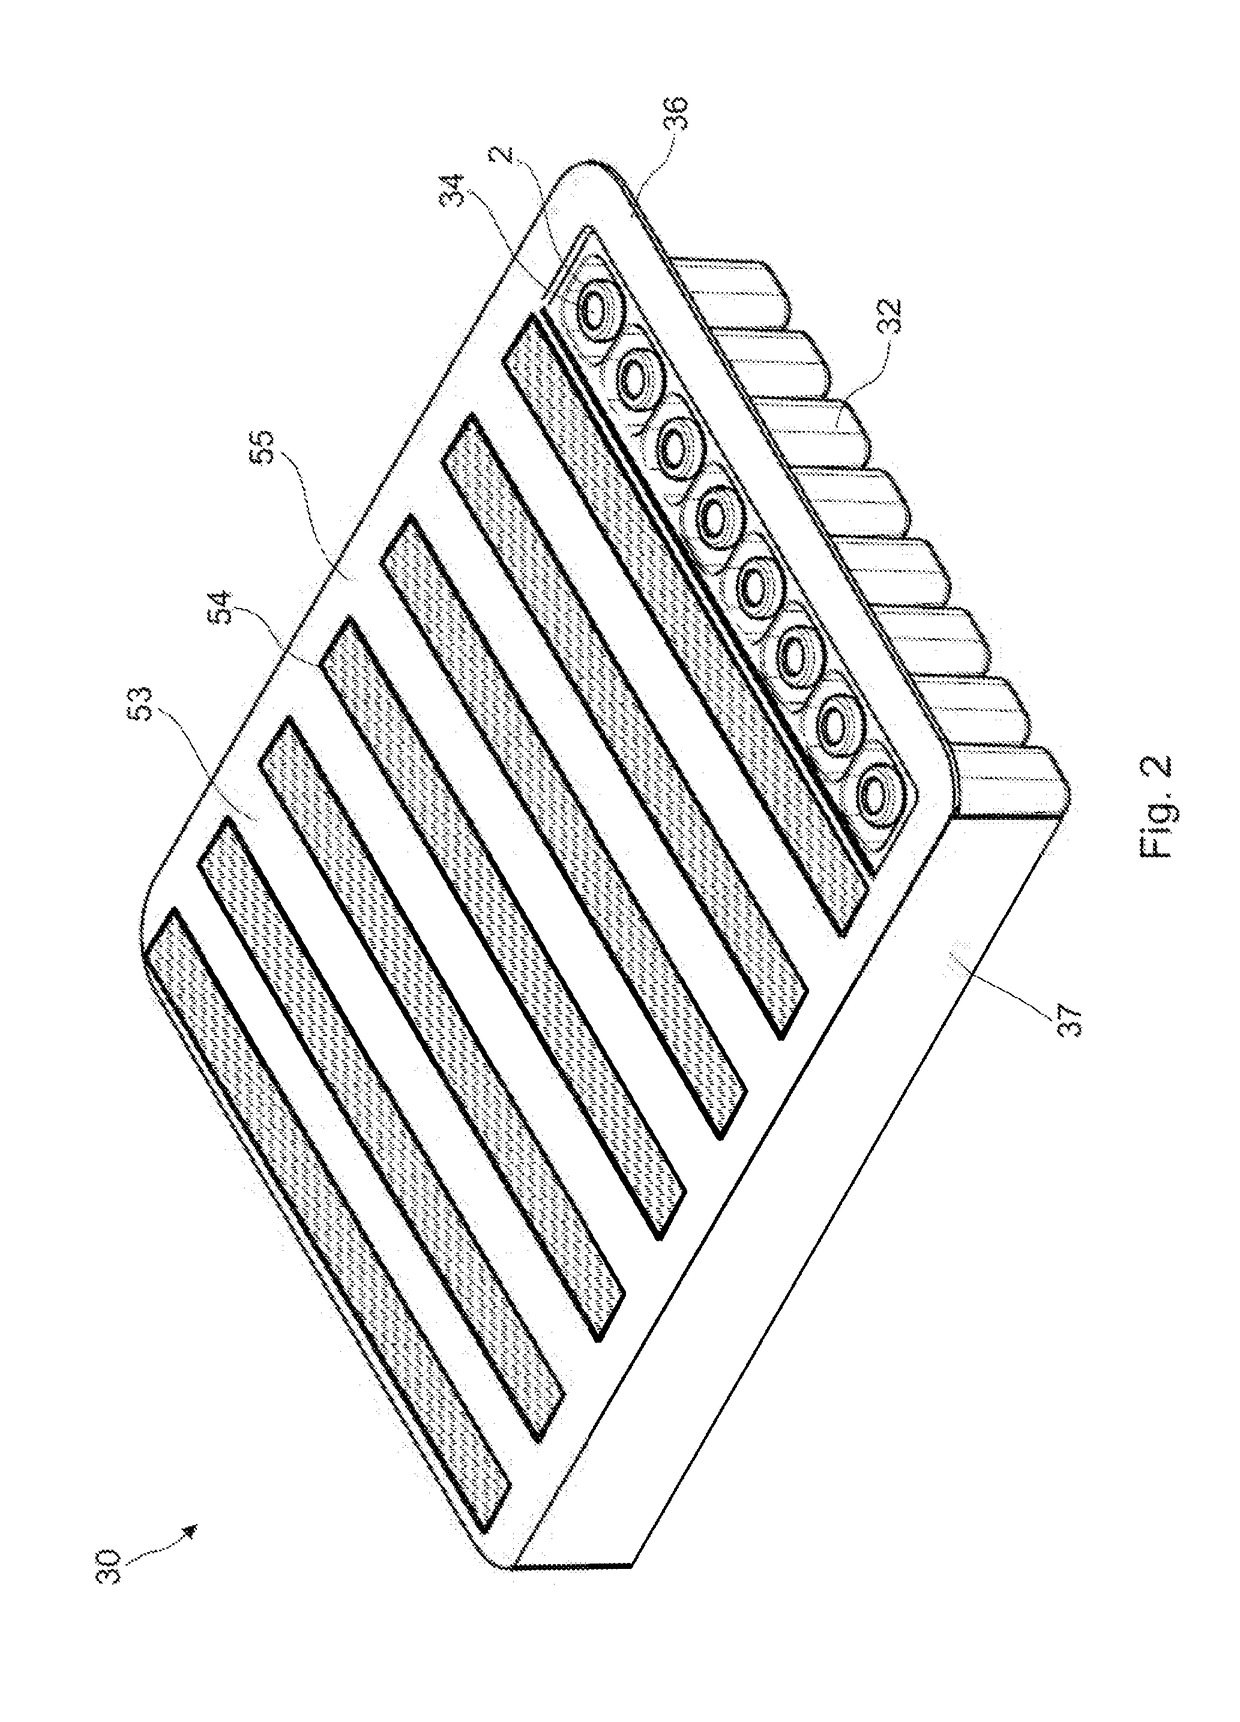 Packaging structure and method for sterile packaging containers for substances for medical, pharmaceutical or cosmetic applications and methods for further processing of containers using this packaging structure